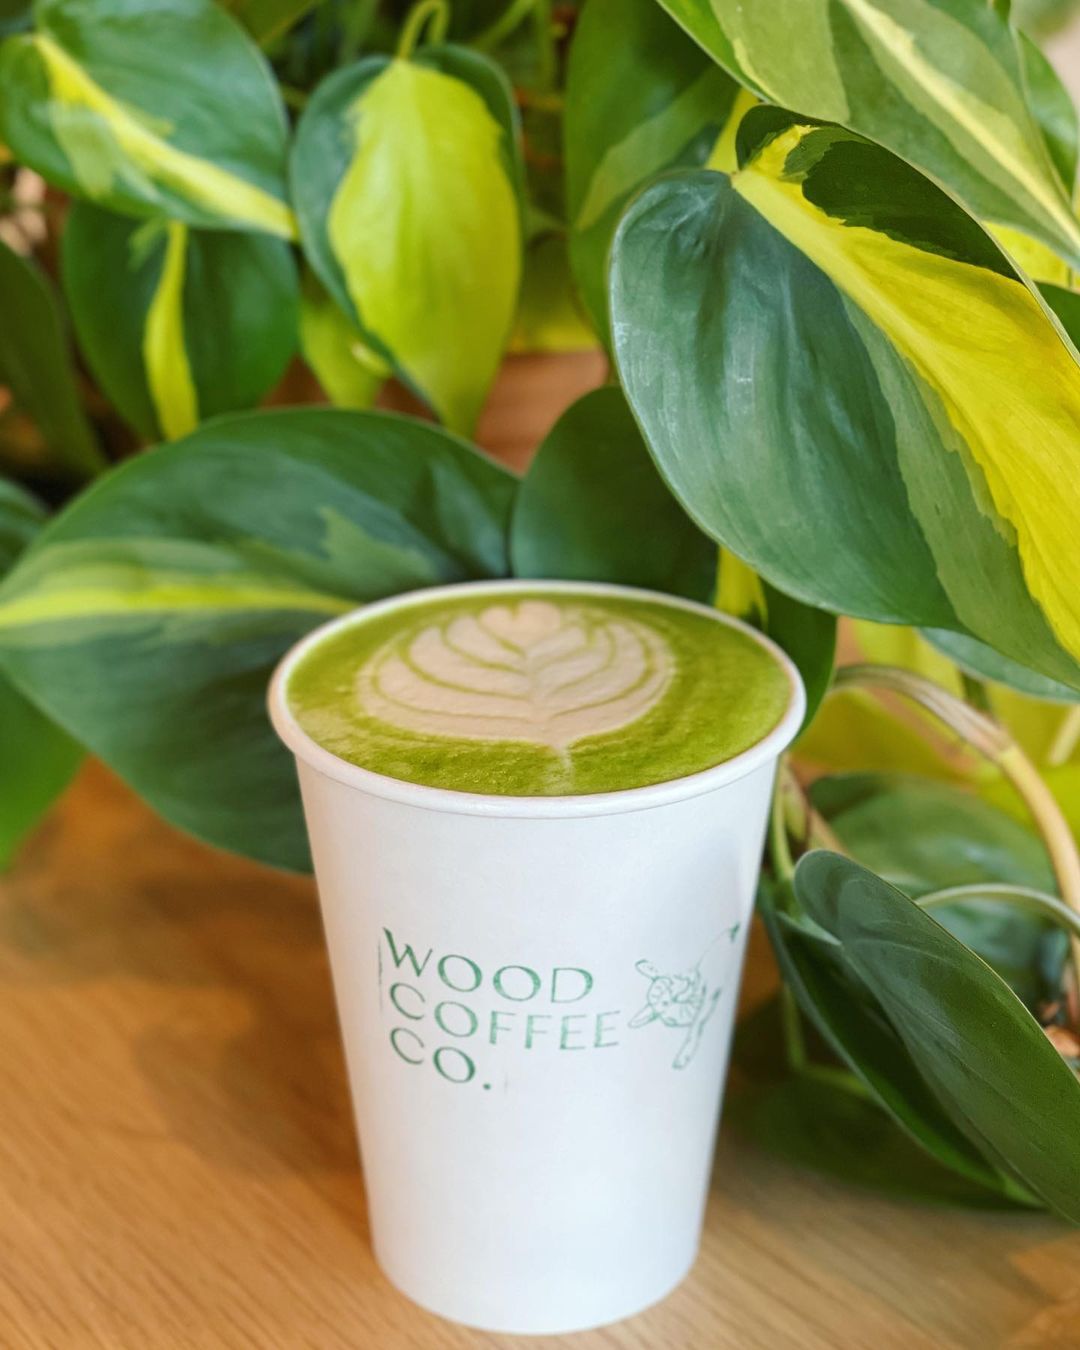 Wood Coffee Co. drink with greenery in the background